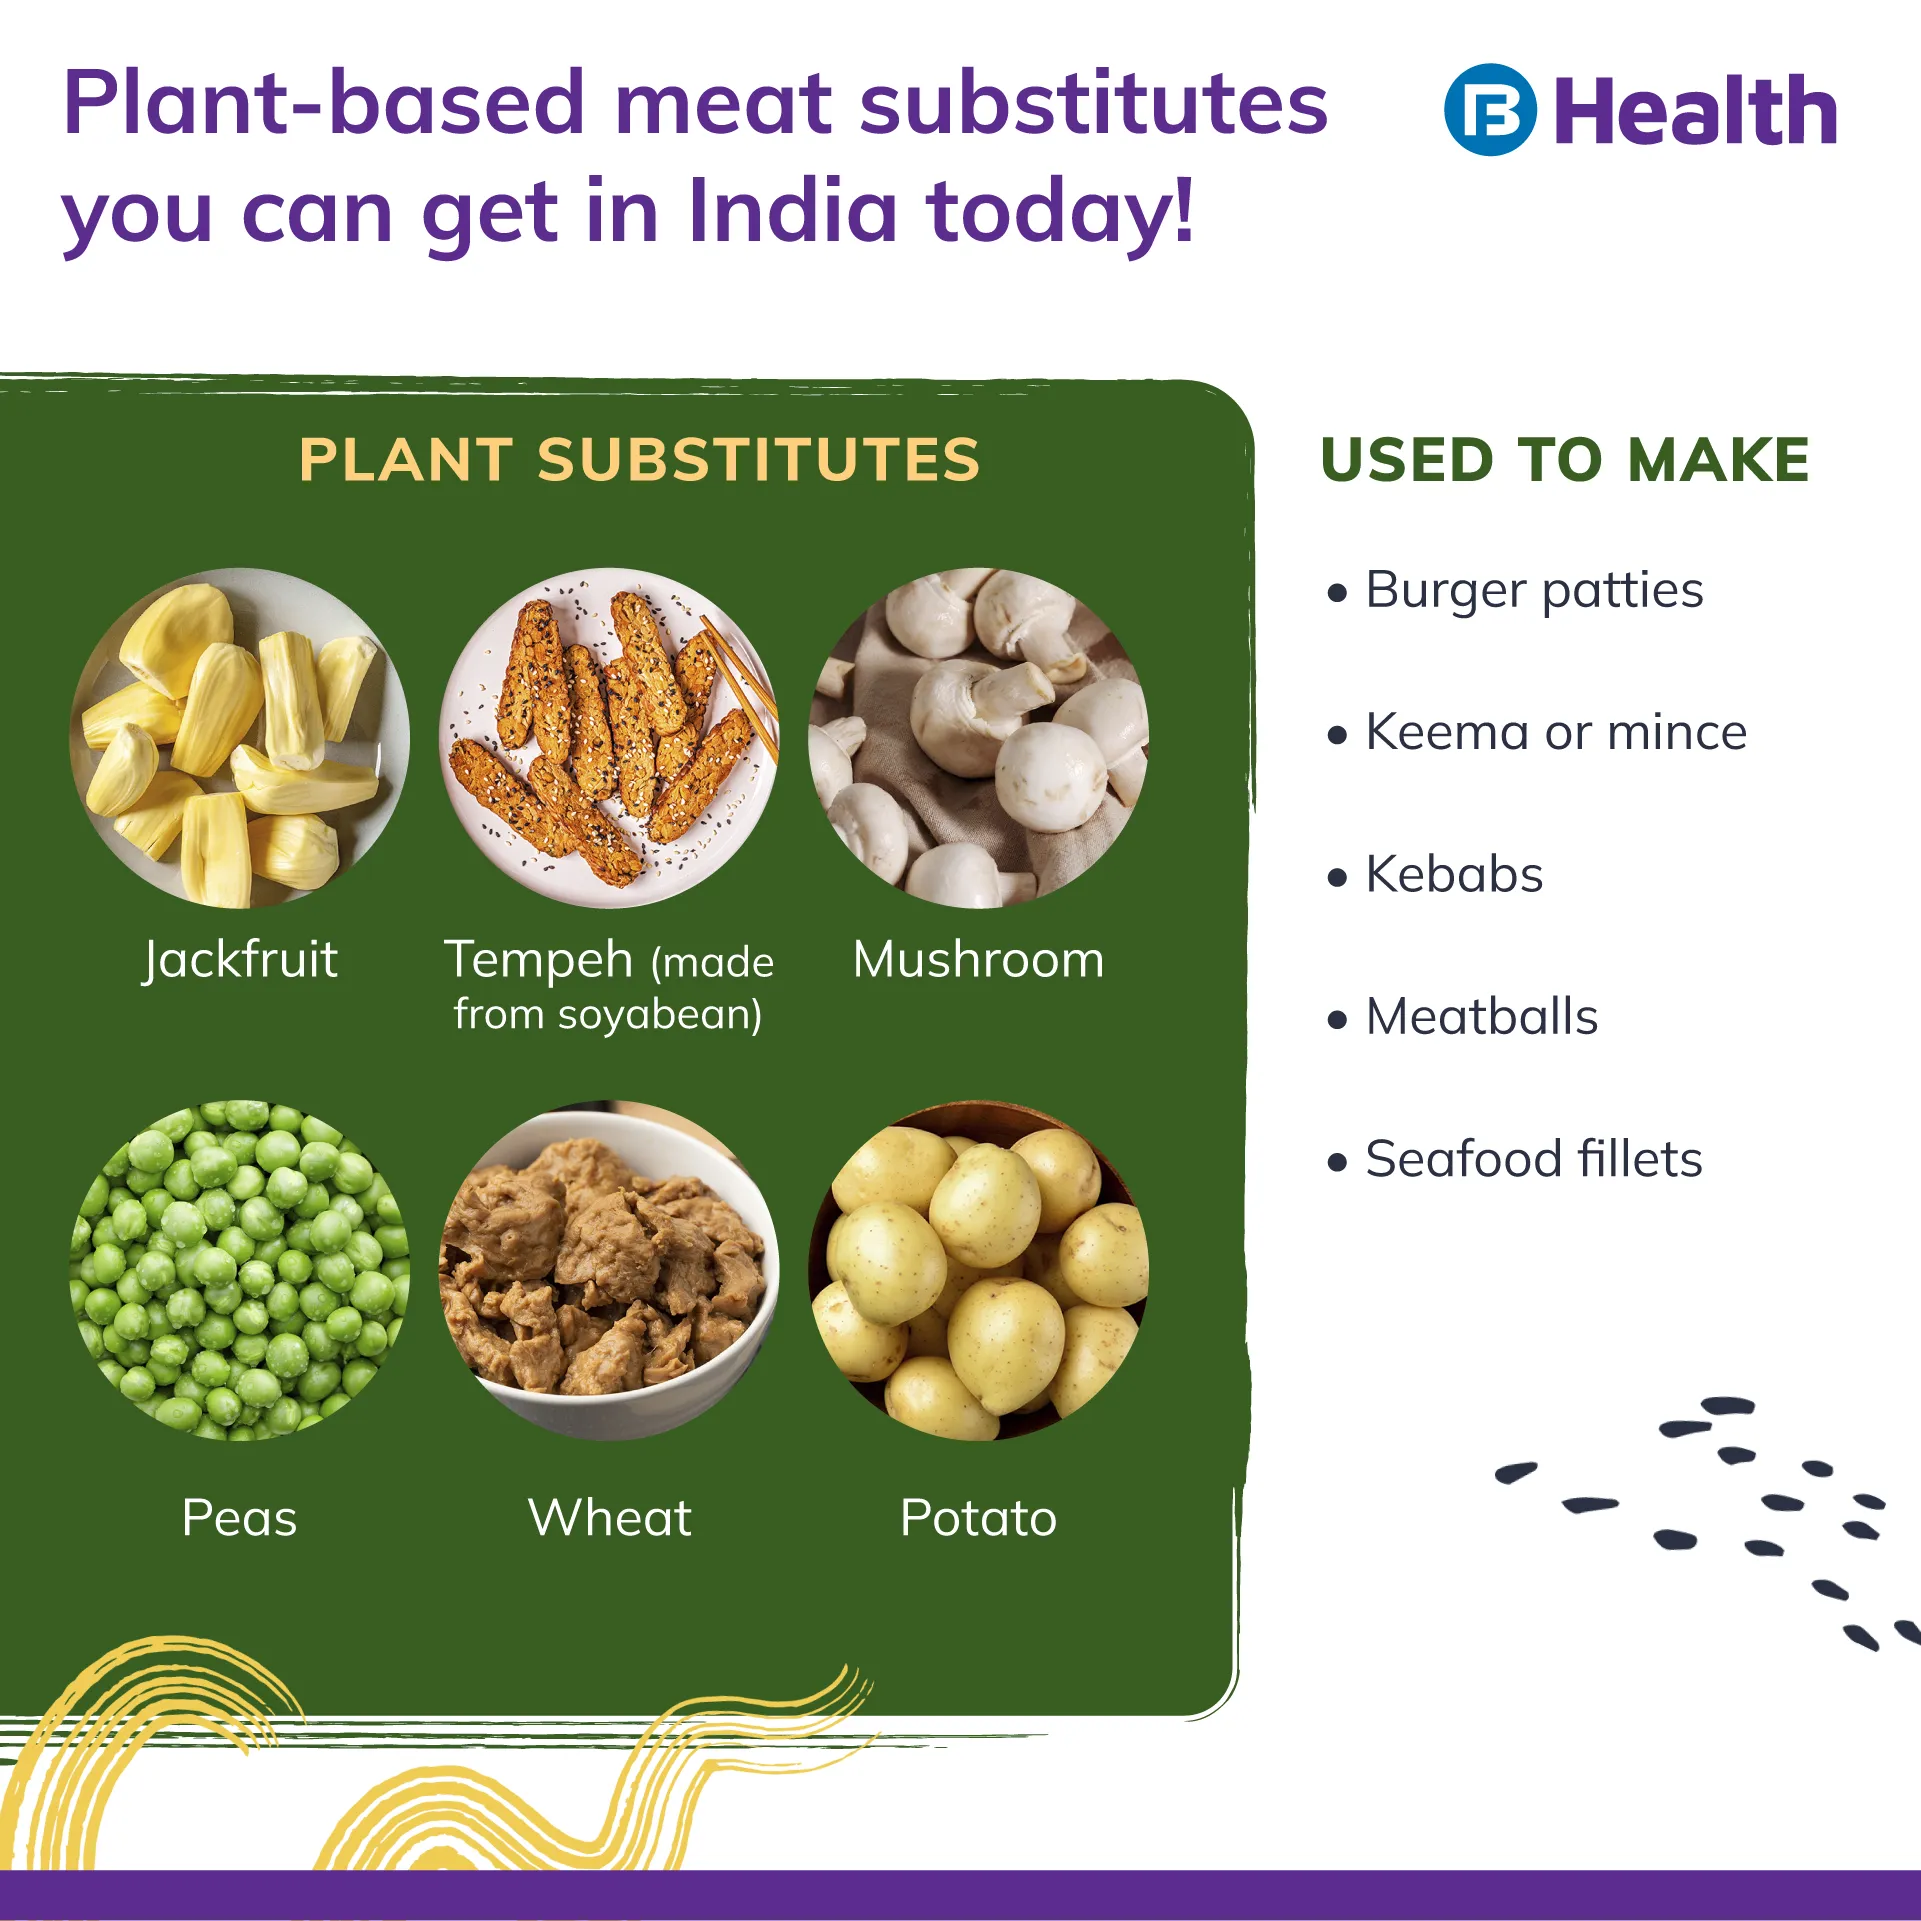 Plant-based meat substitutes